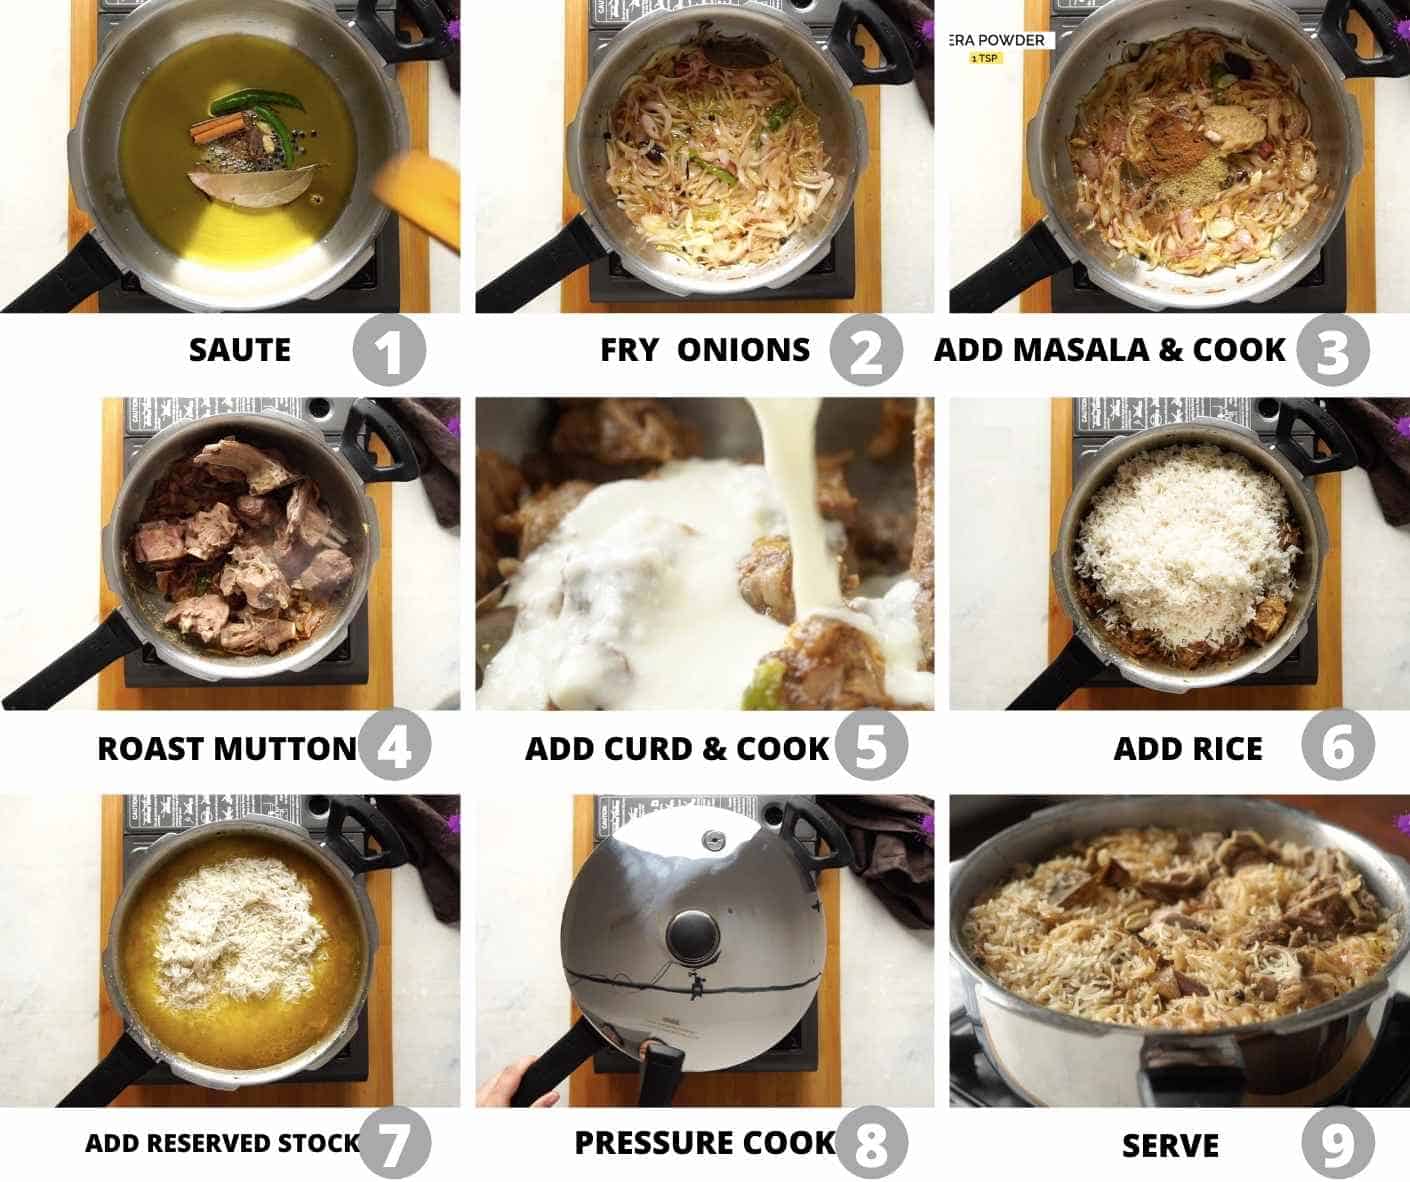 Step by step images to show how to pressure cook the pulao